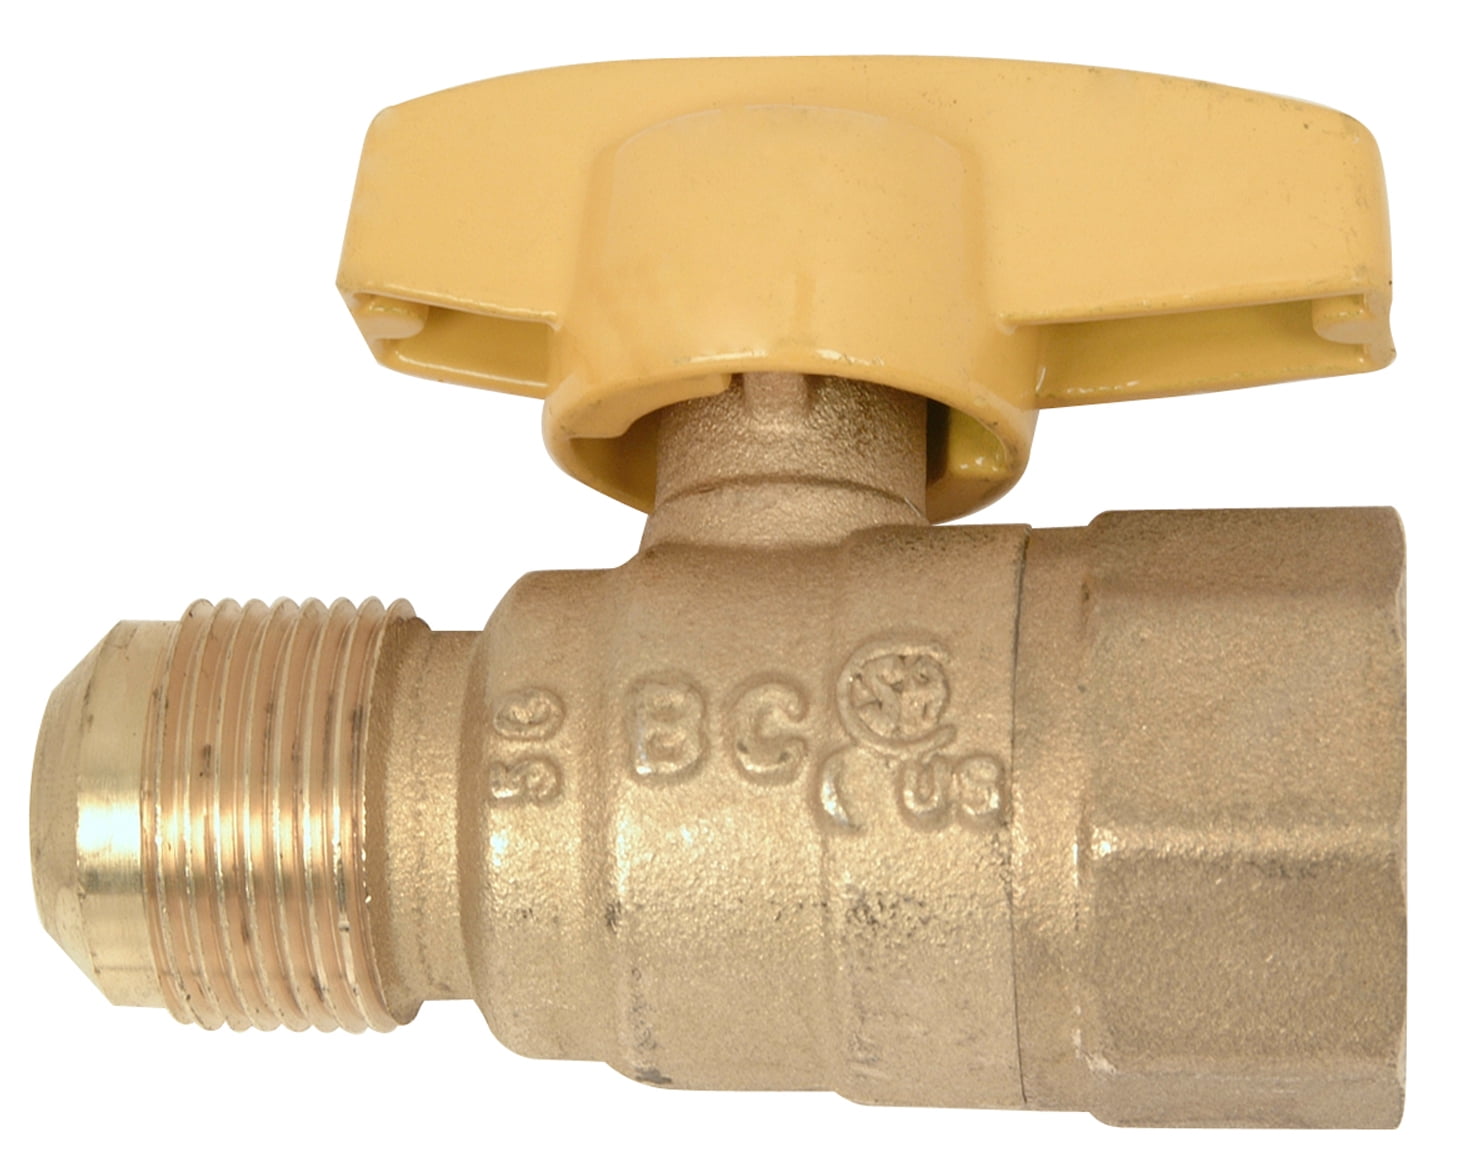 White-Rodgers 36H33-412 Series 36H Slow Opening Single Stage Opening  Natural/Lp Gas Valve, 3/4 x 3/4 Pipe, -40 Degree - 175 Degree F  Temperature